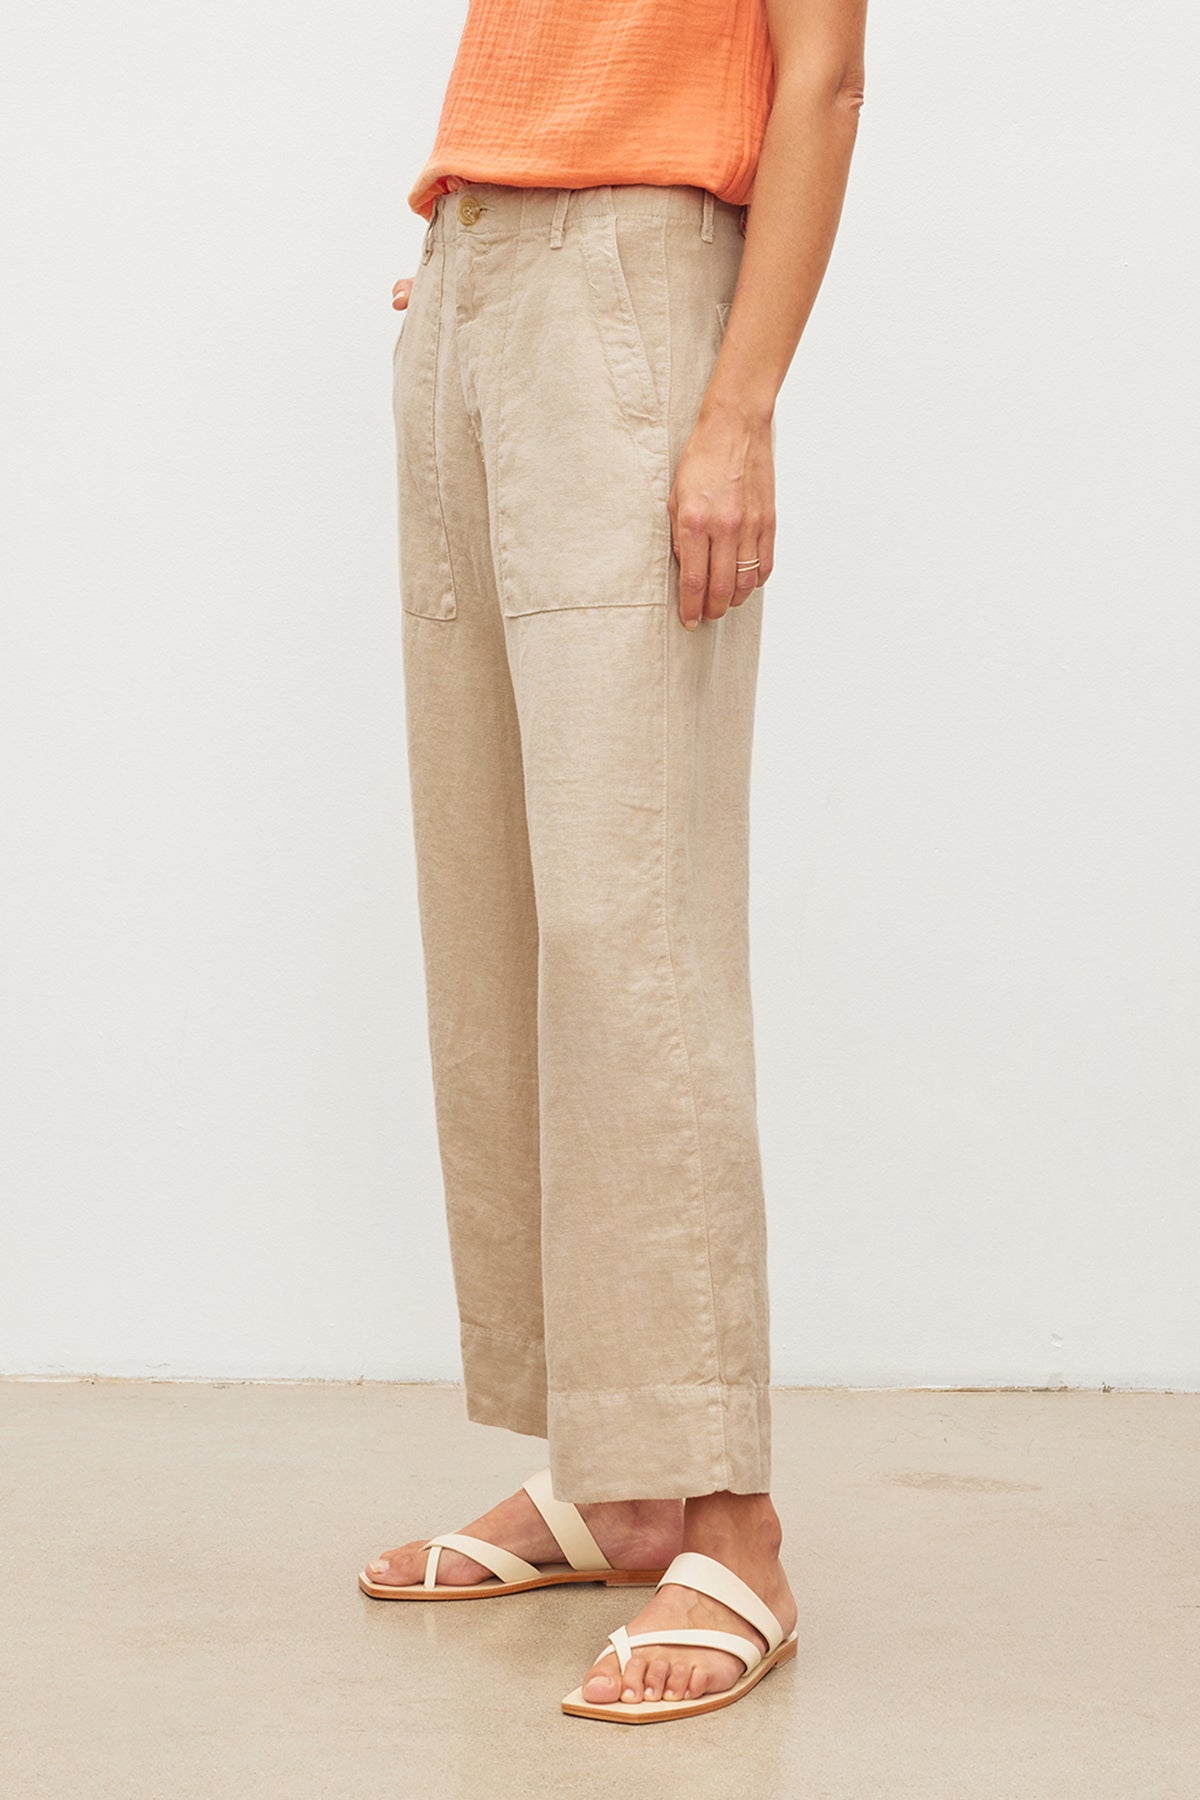 A person standing in a Velvet by Graham & Spencer DRU HEAVY LINEN PANT with patch pockets and white sandals against a plain background.-36247915659457